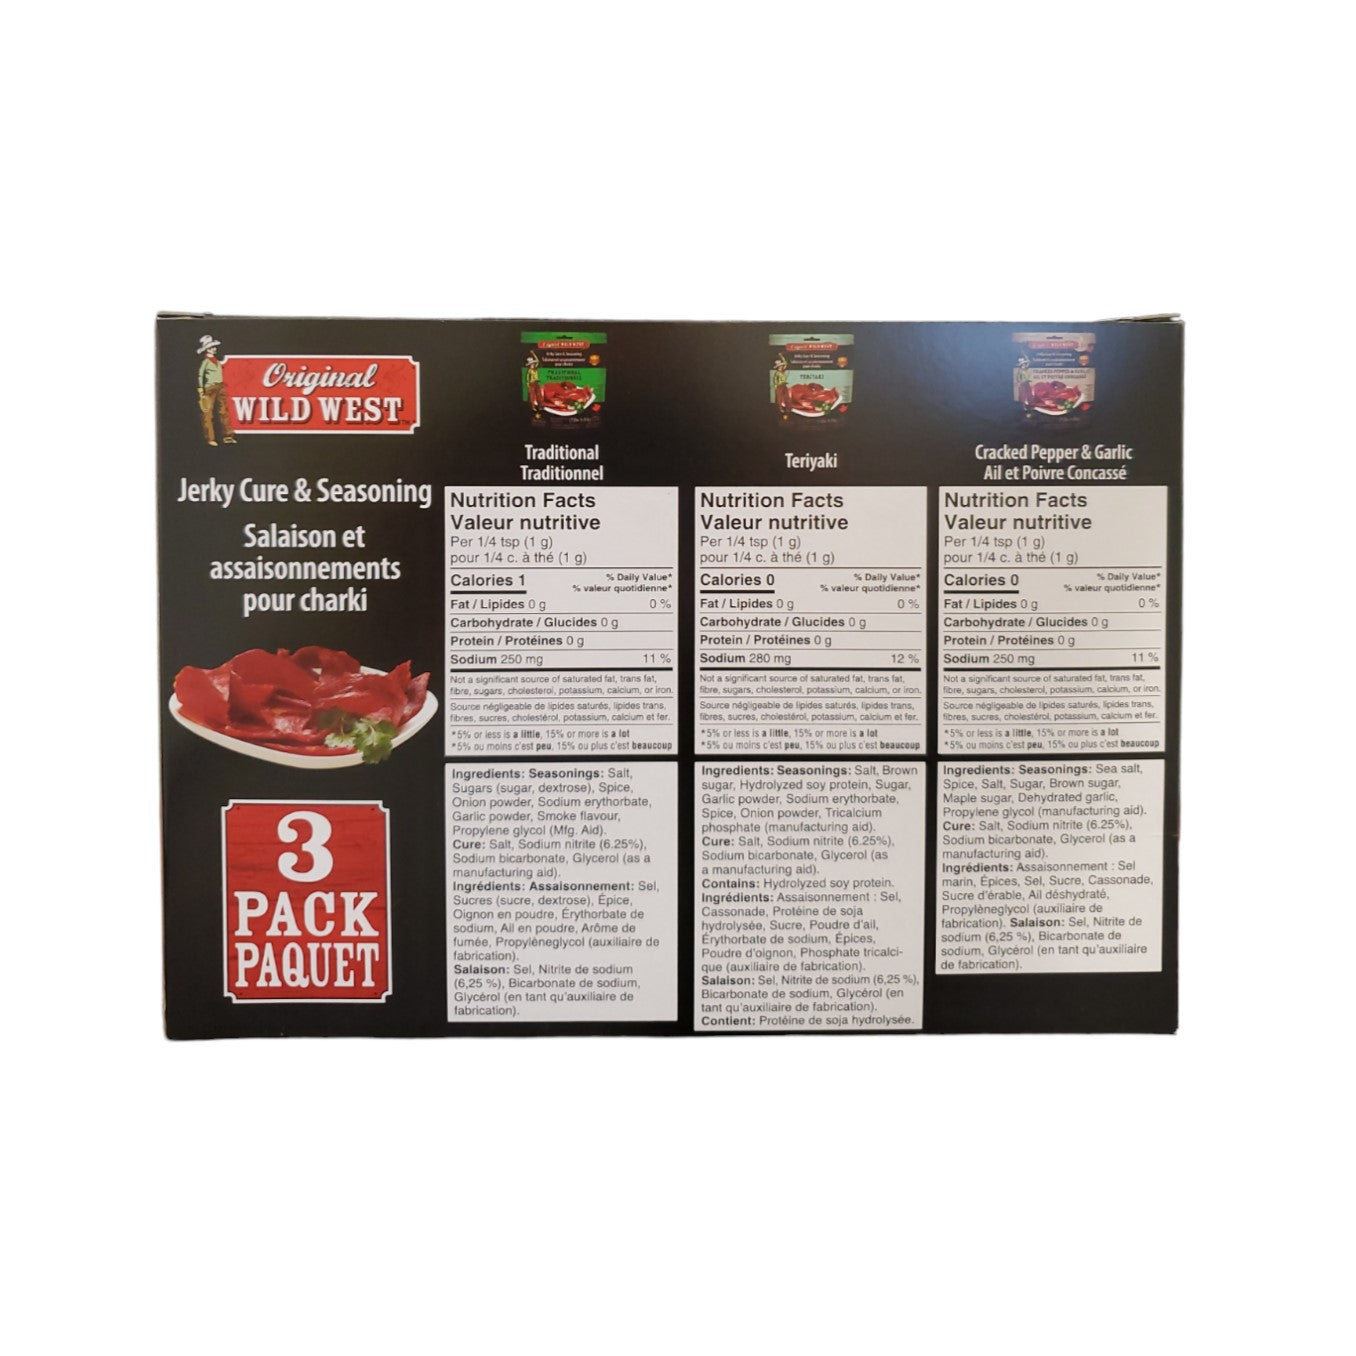 Jerky Cure and Seasoning Multi Pack